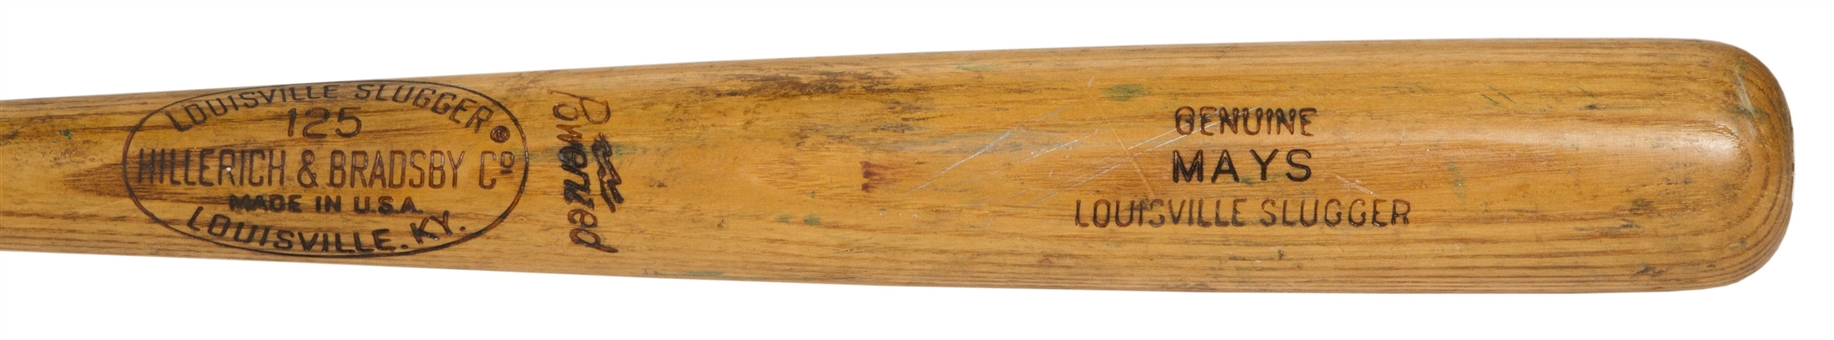 Outstanding 1966 Willie Mays Game Used and Vintage Signed  Hillerich and Bradsby S2 Model Bat (PSA/DNA  GU 9.5)